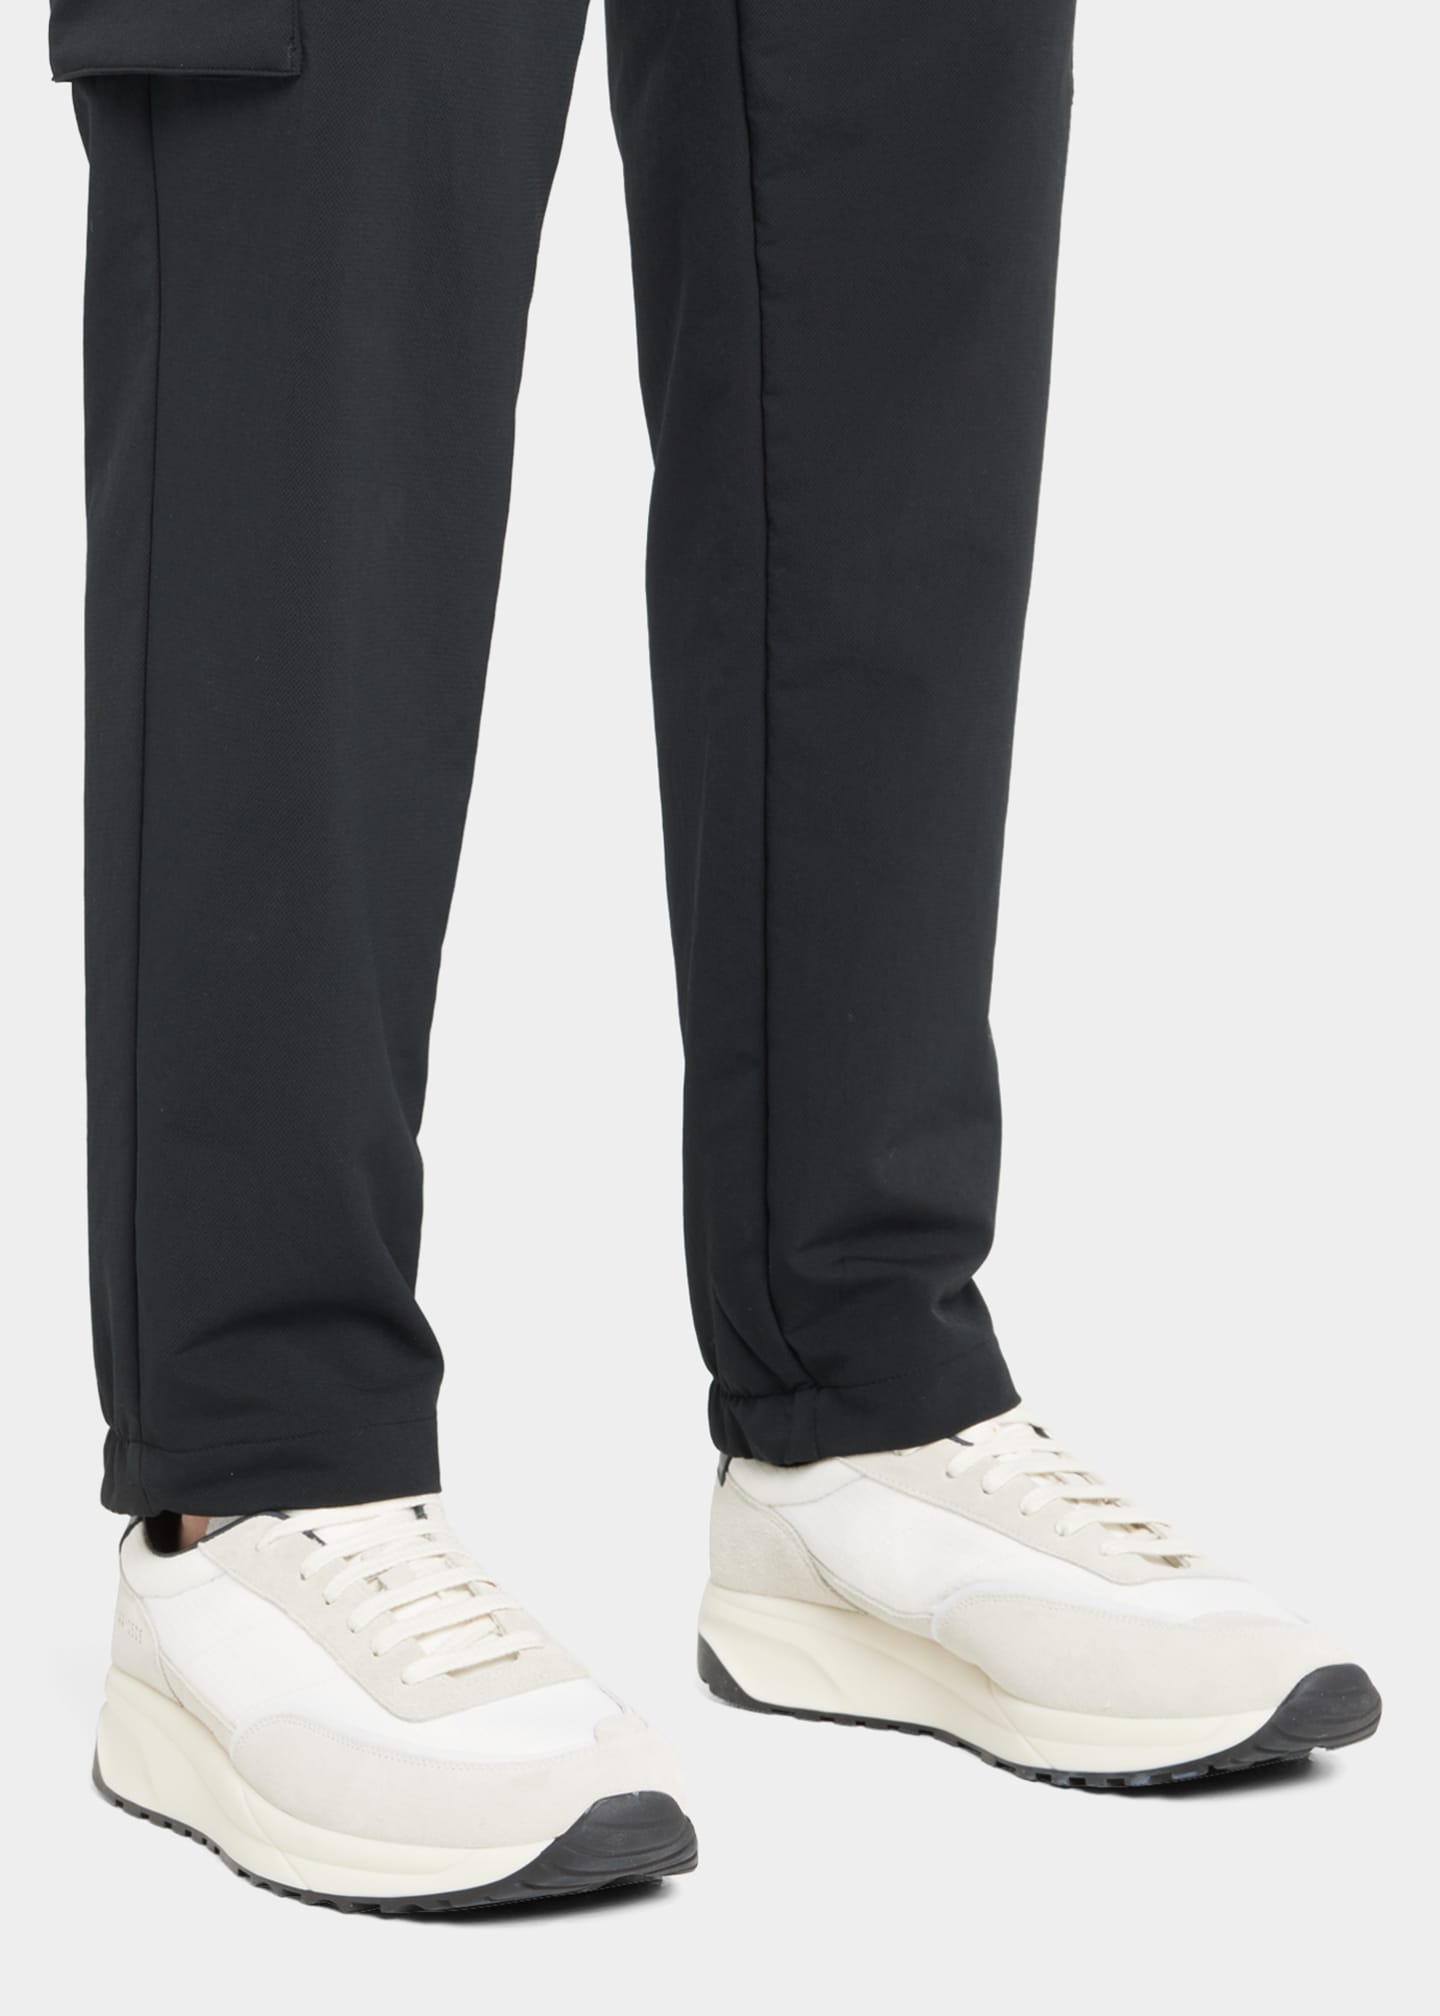 Common Projects Men's Track 80 Suede & Tech Fabric Sneakers - Bergdorf ...